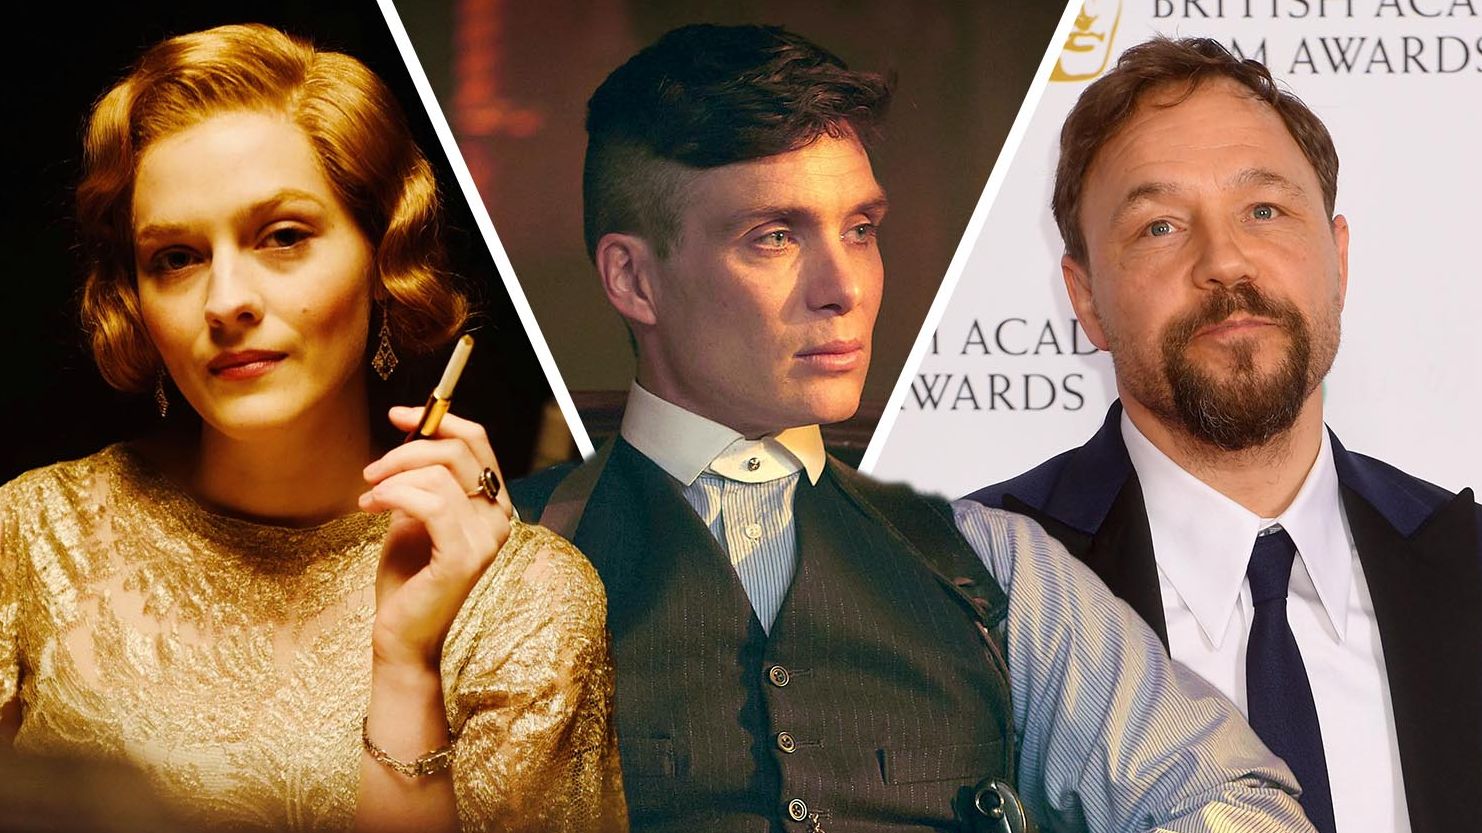 Peaky Blinders season 6: release date and everything we know